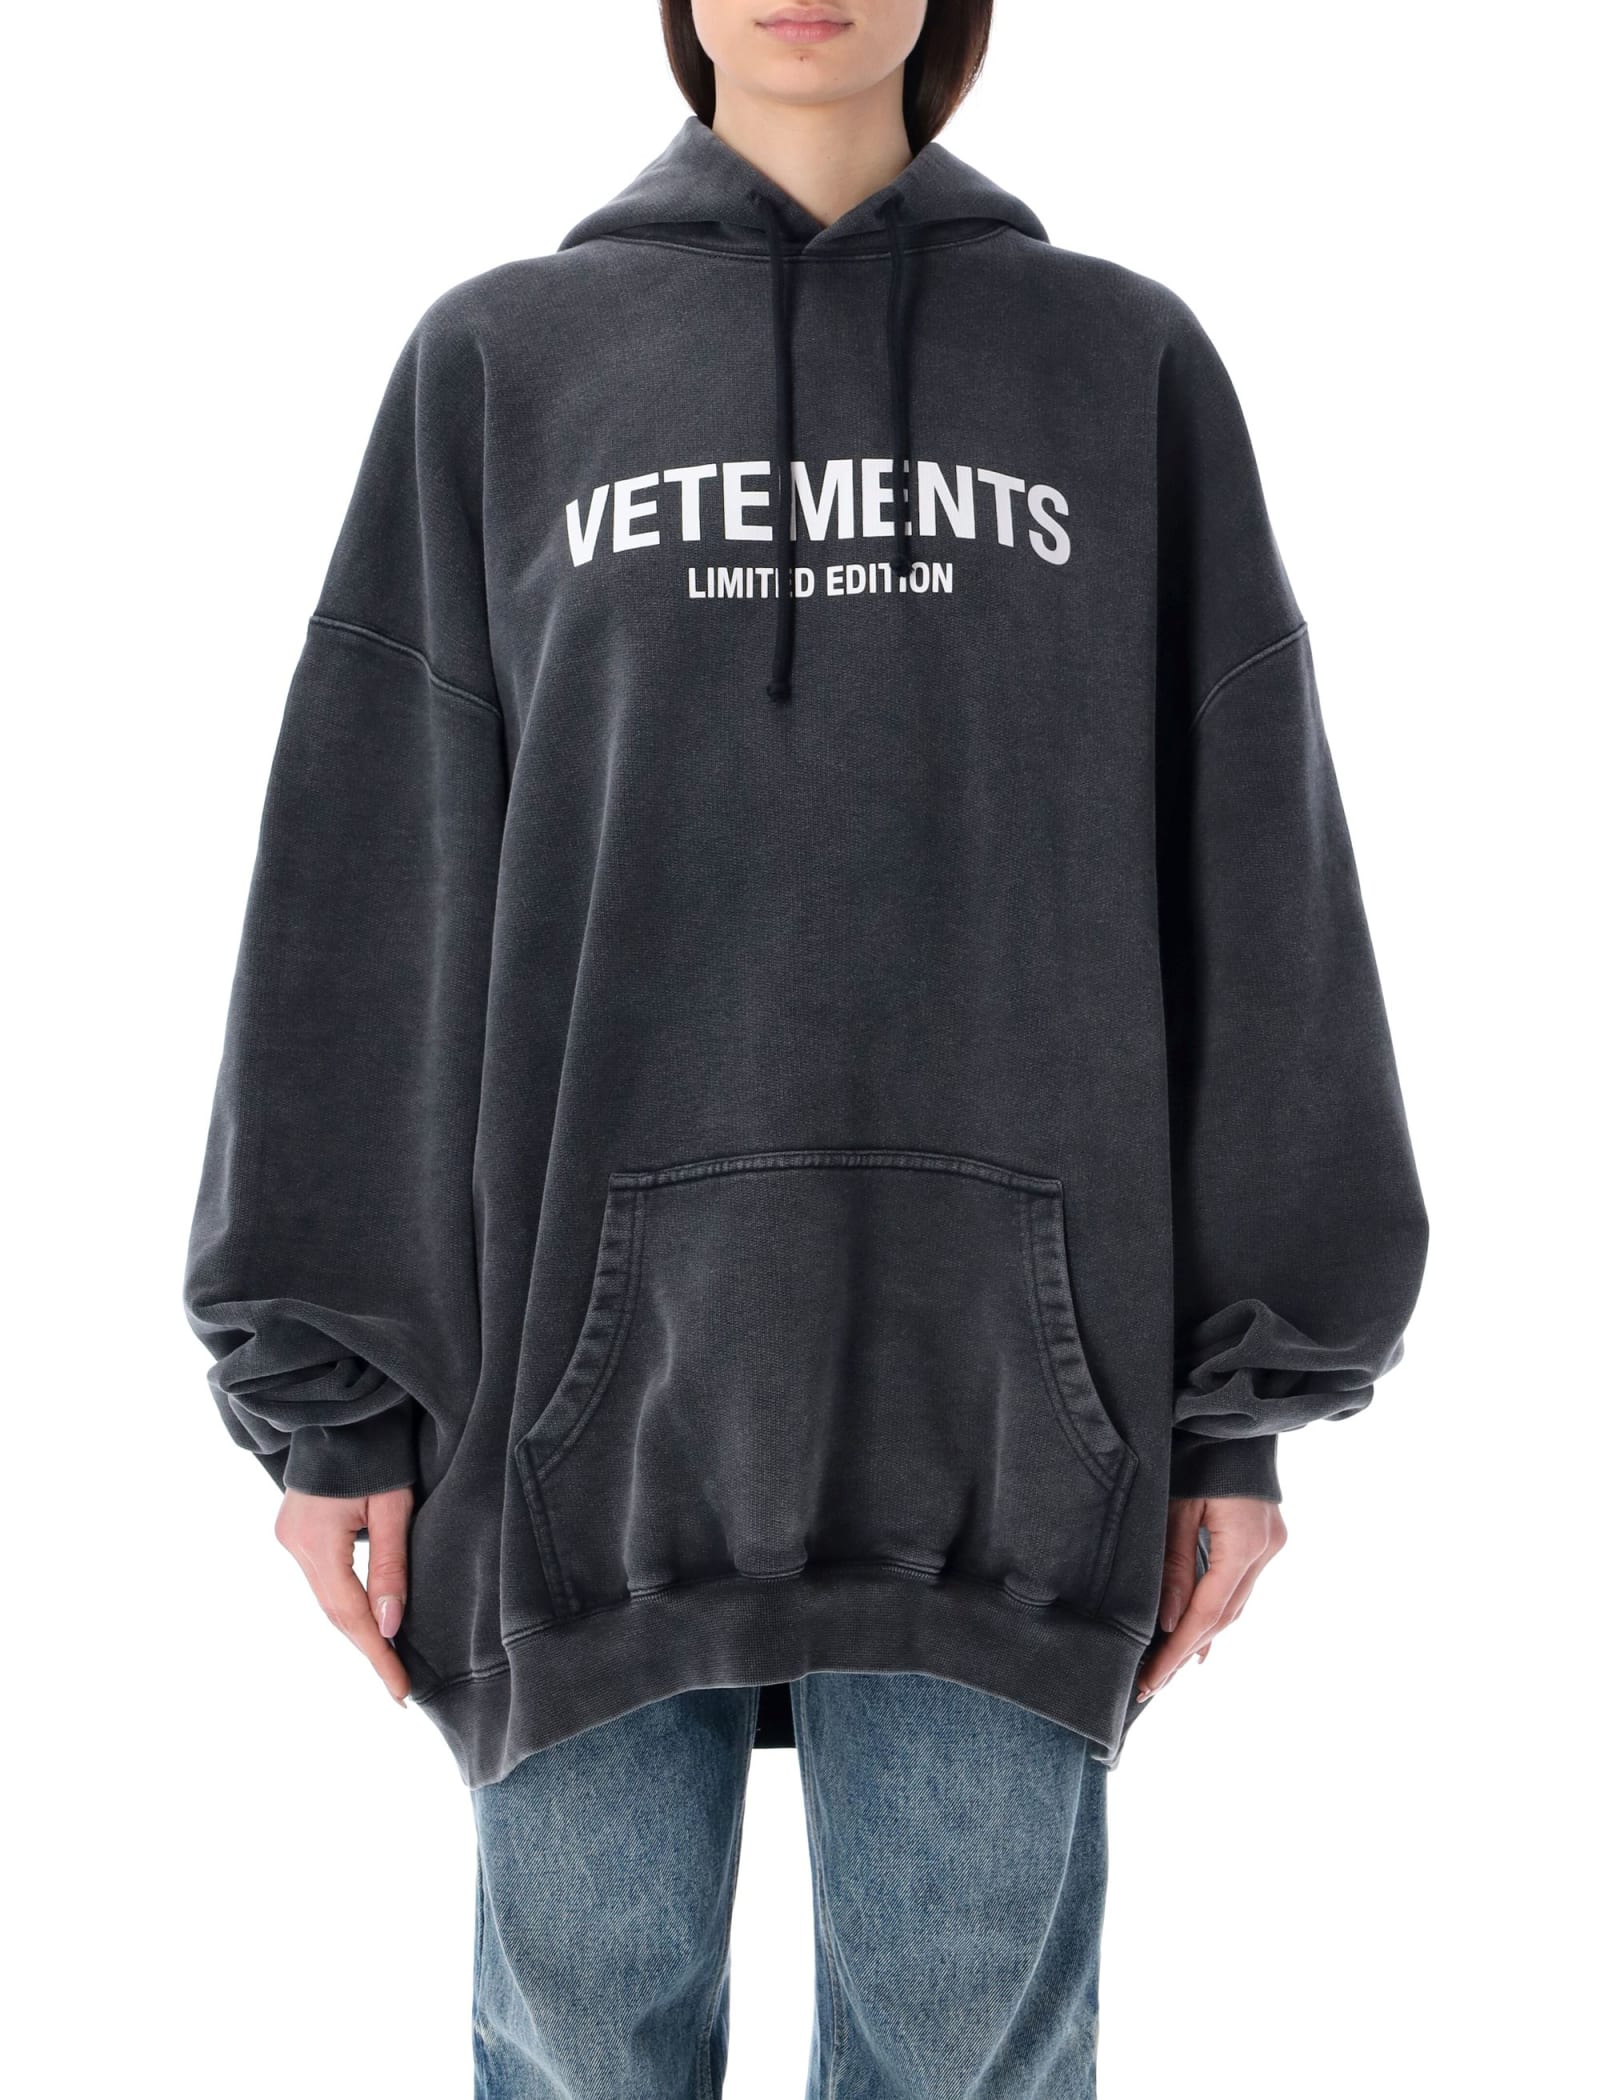 VETEMENTS Logo Limited Edition Hoodie